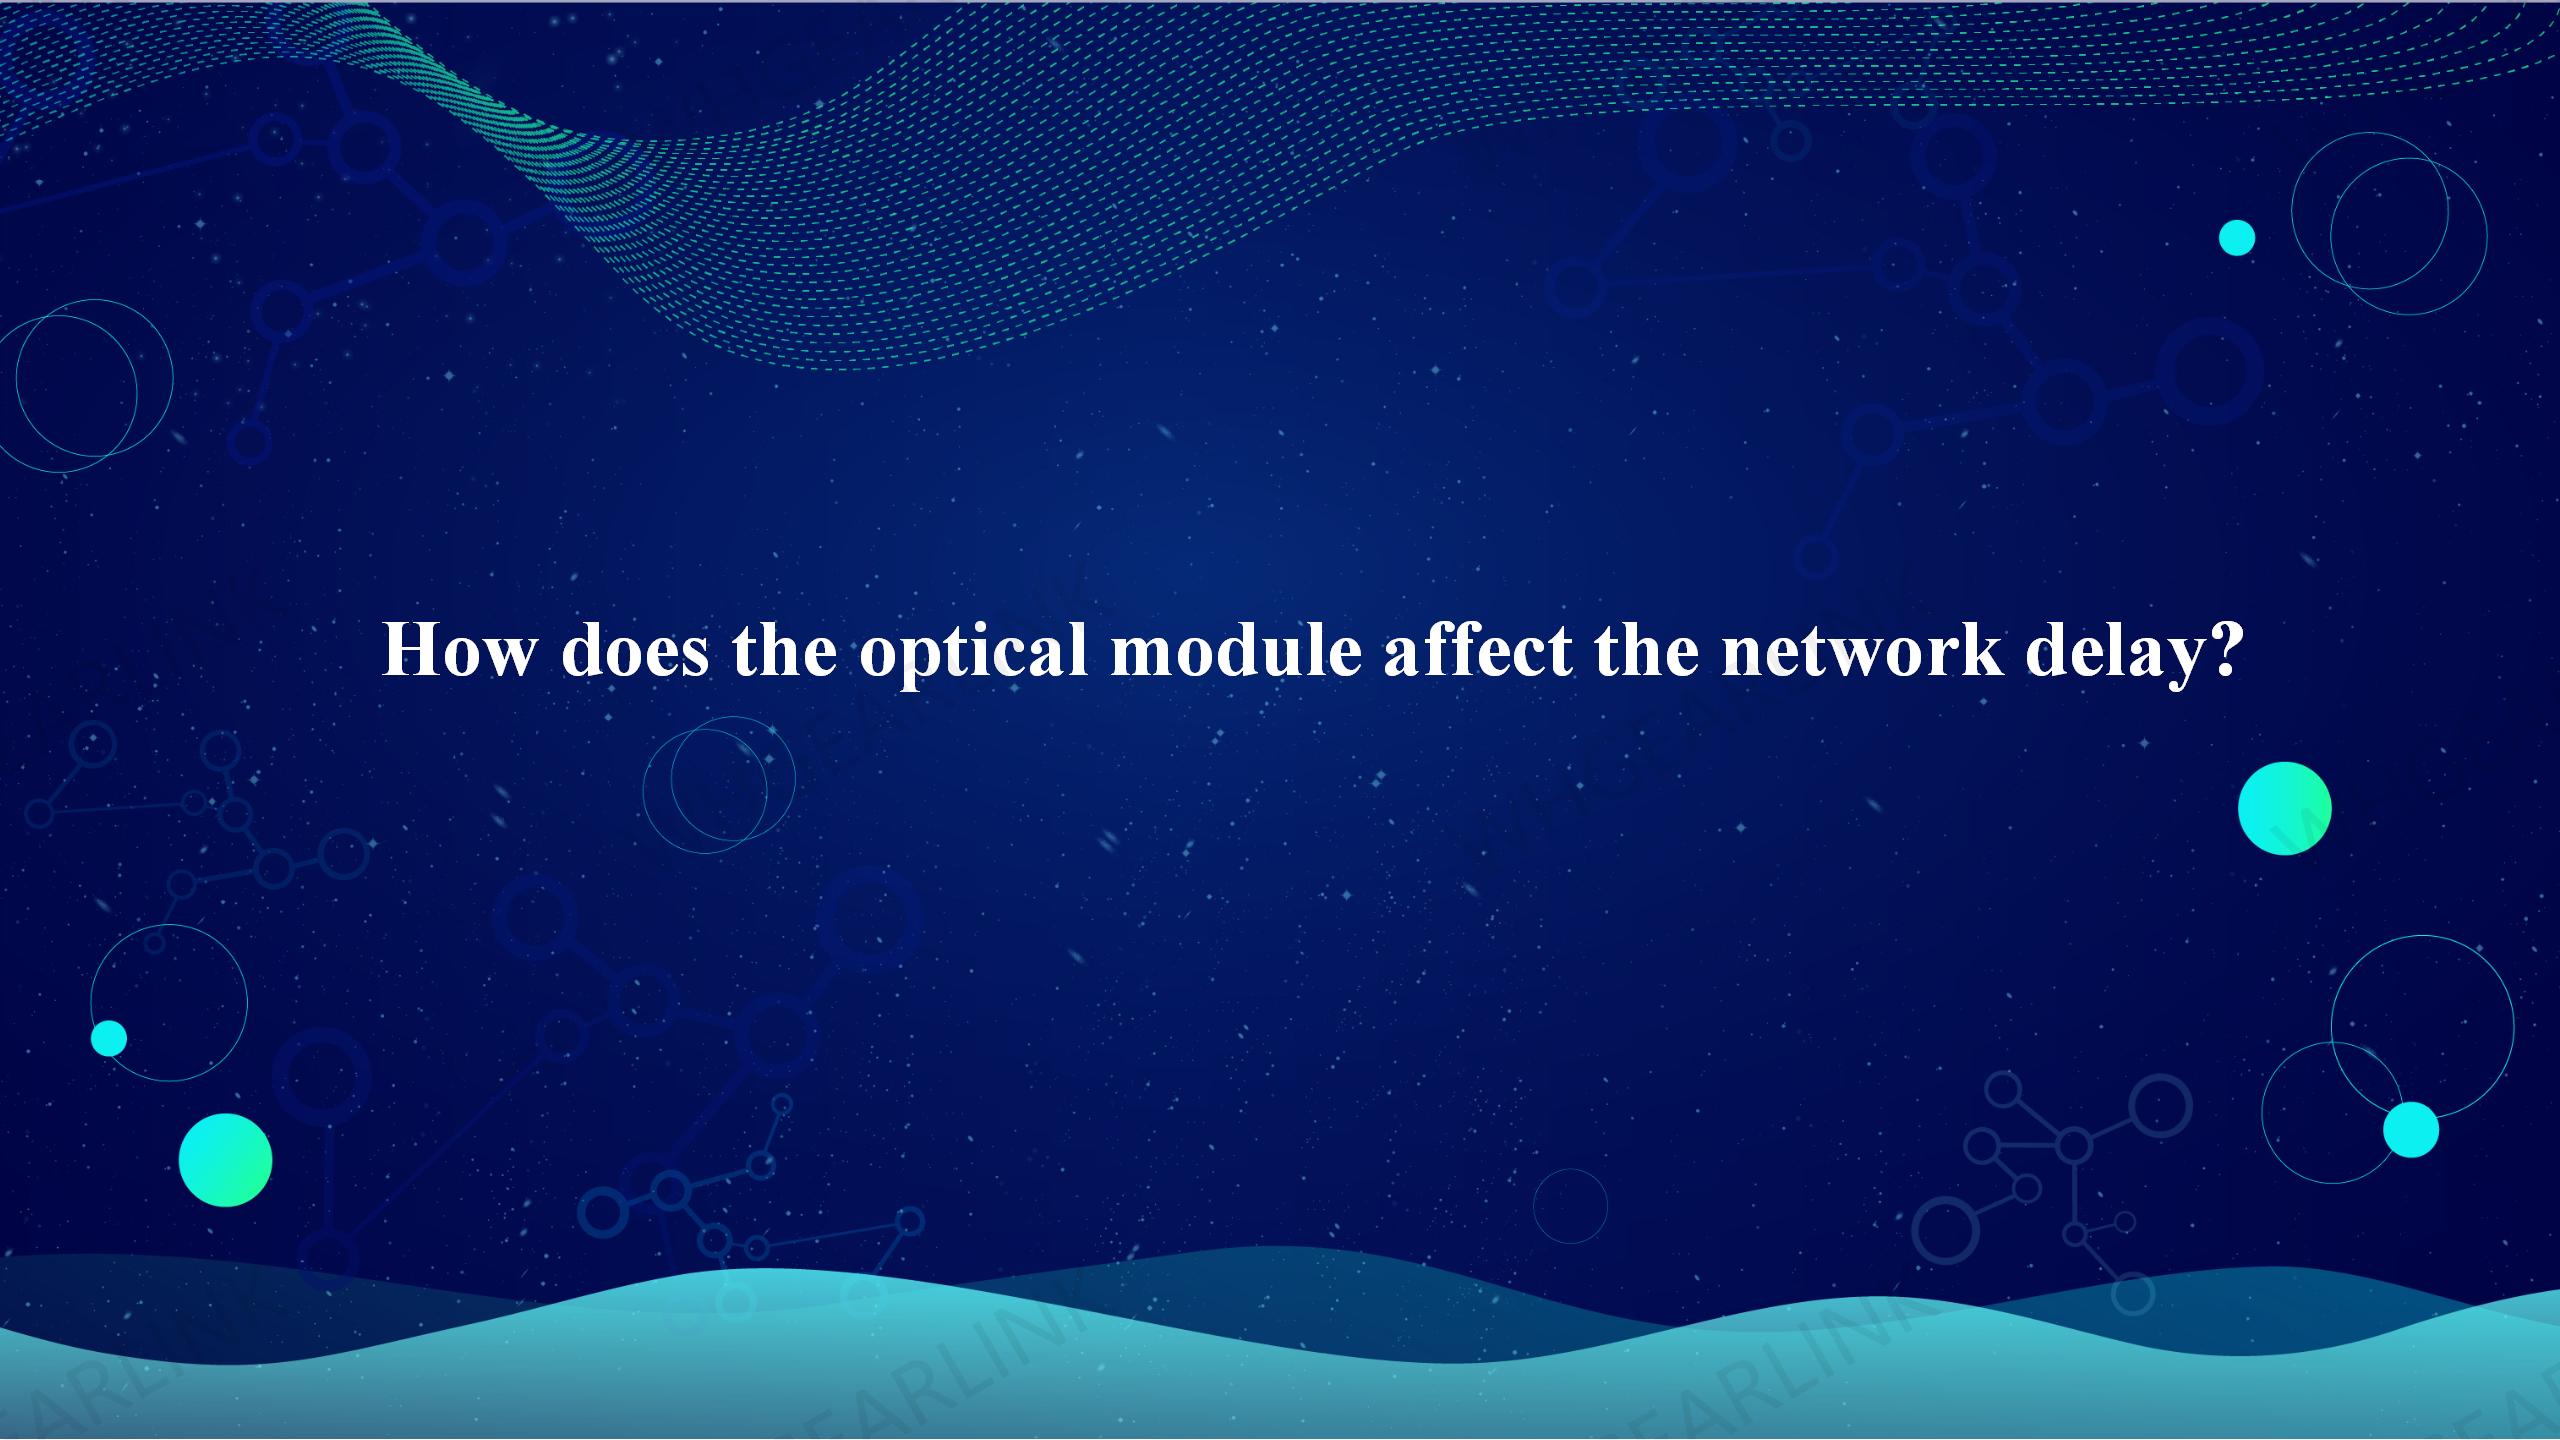 How does the optical module affect the network delay?